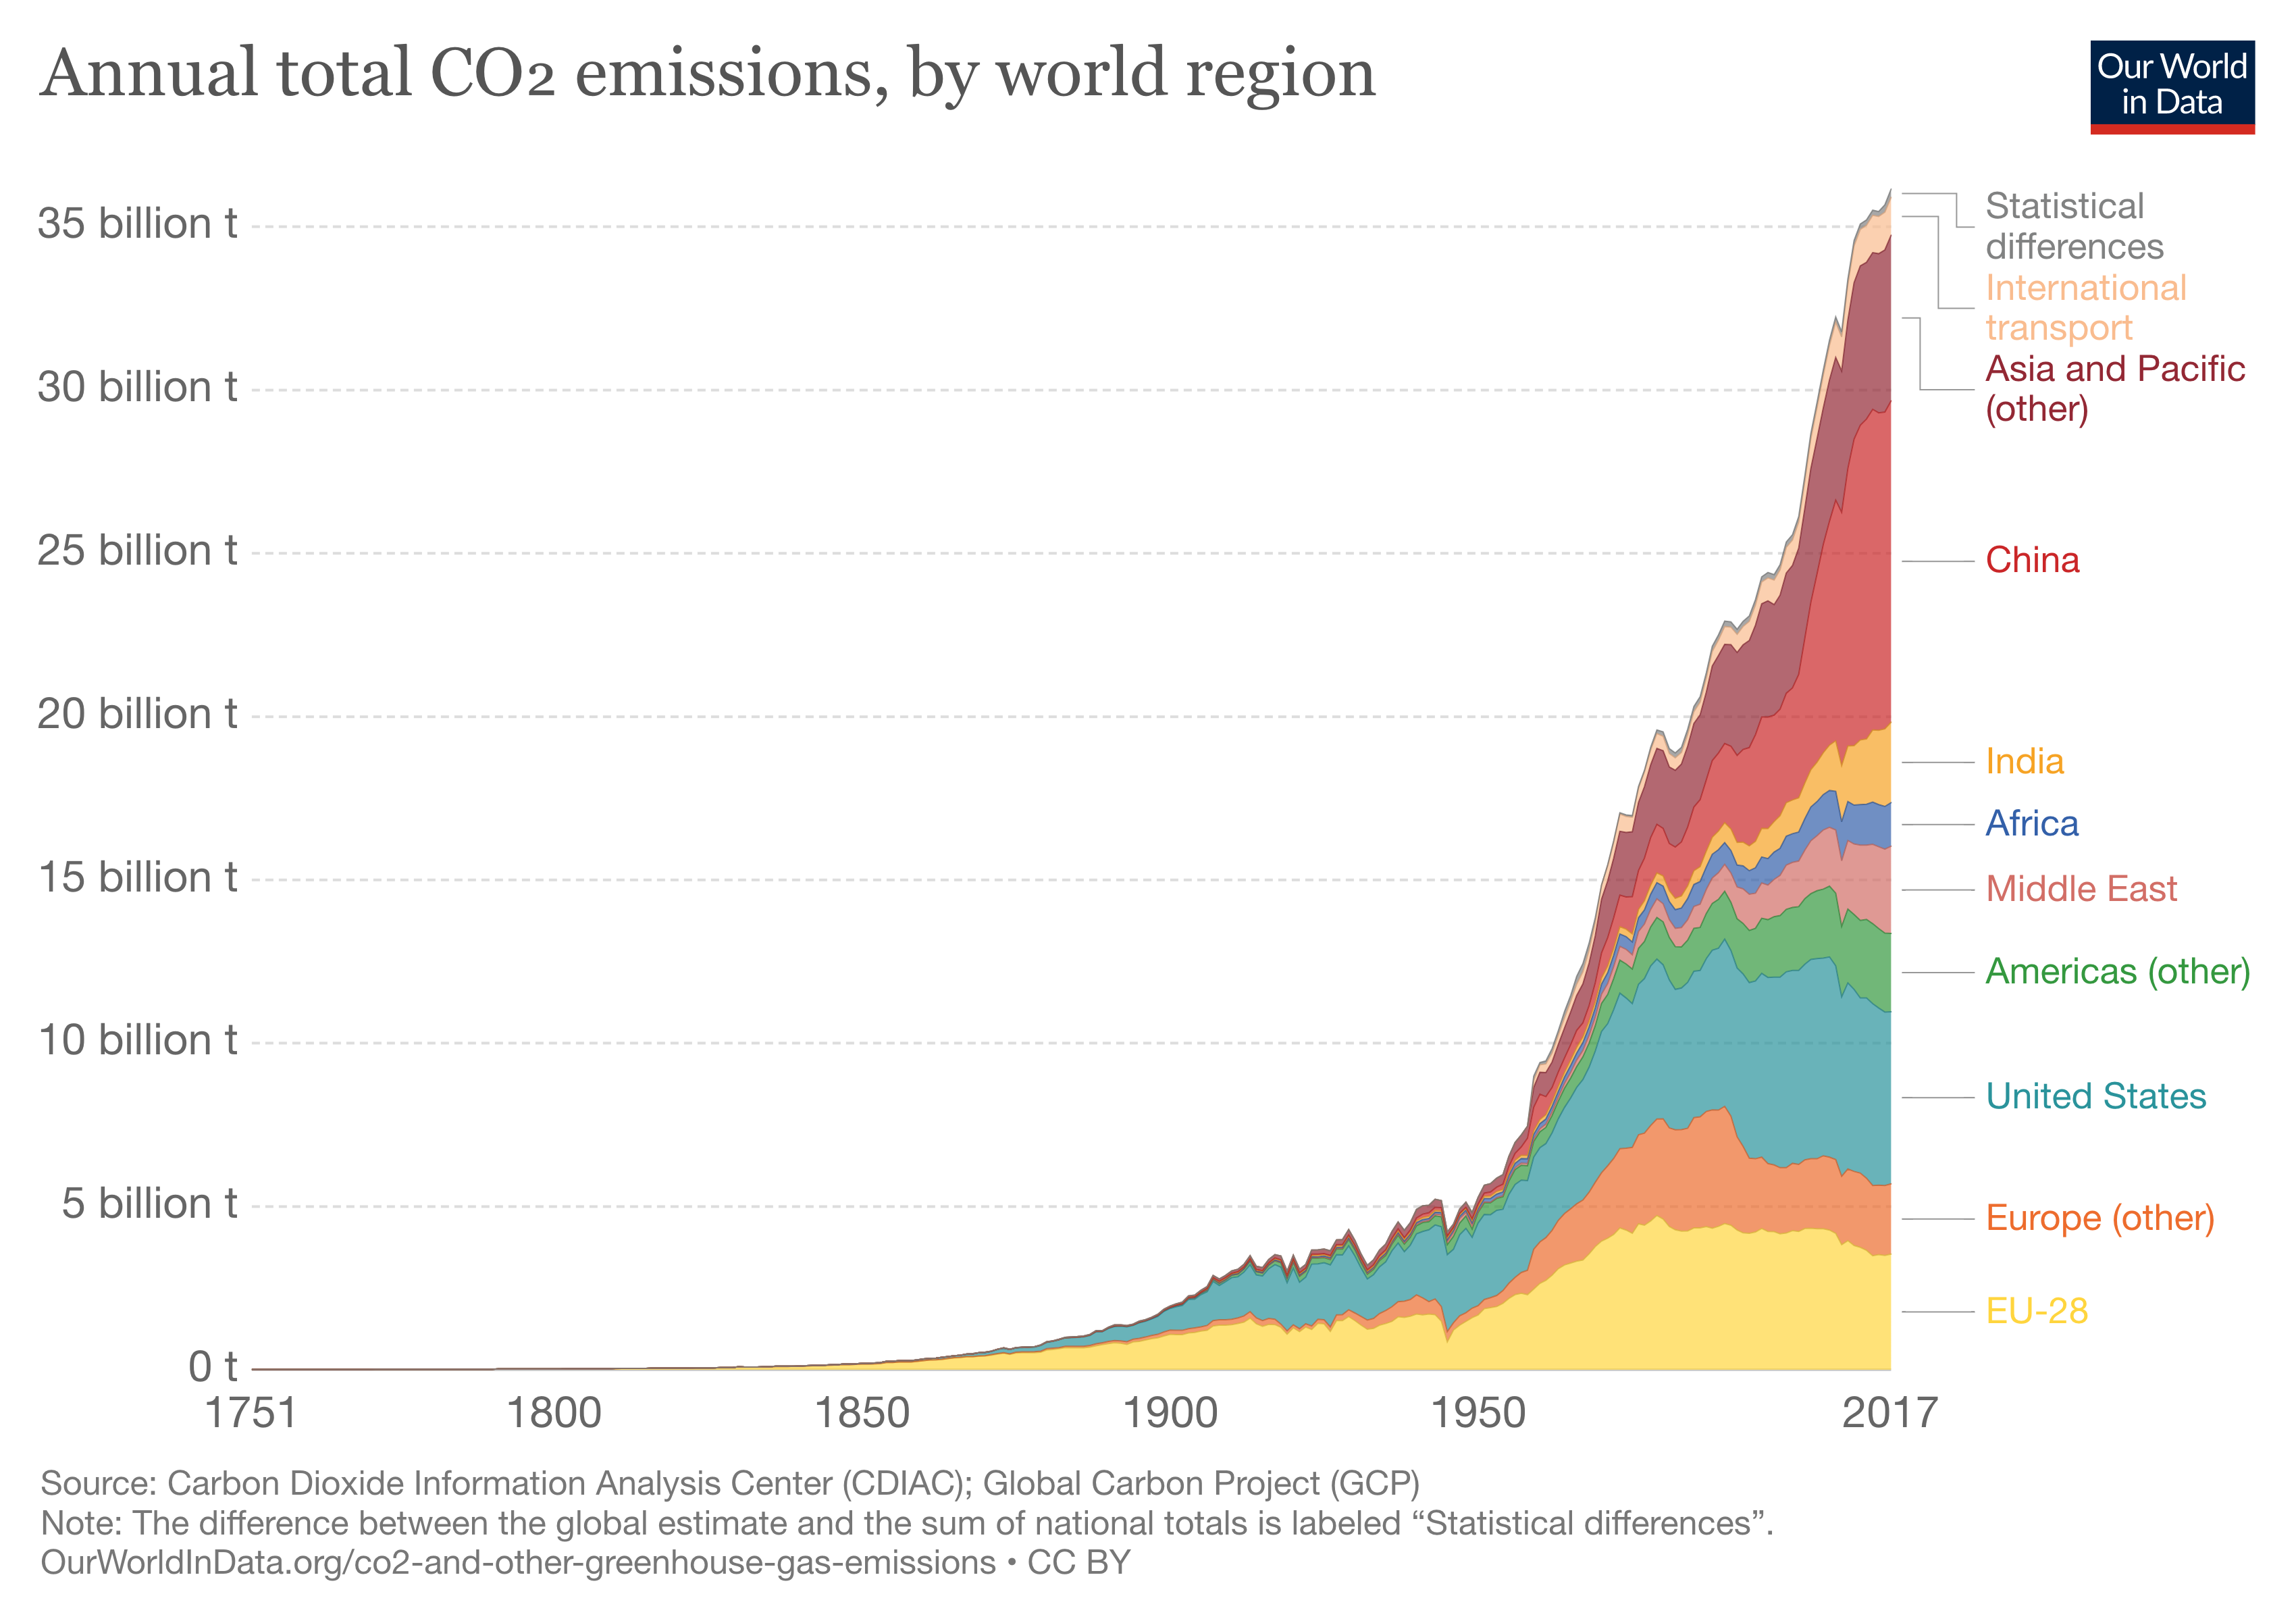 Annual CO2 emissions by region